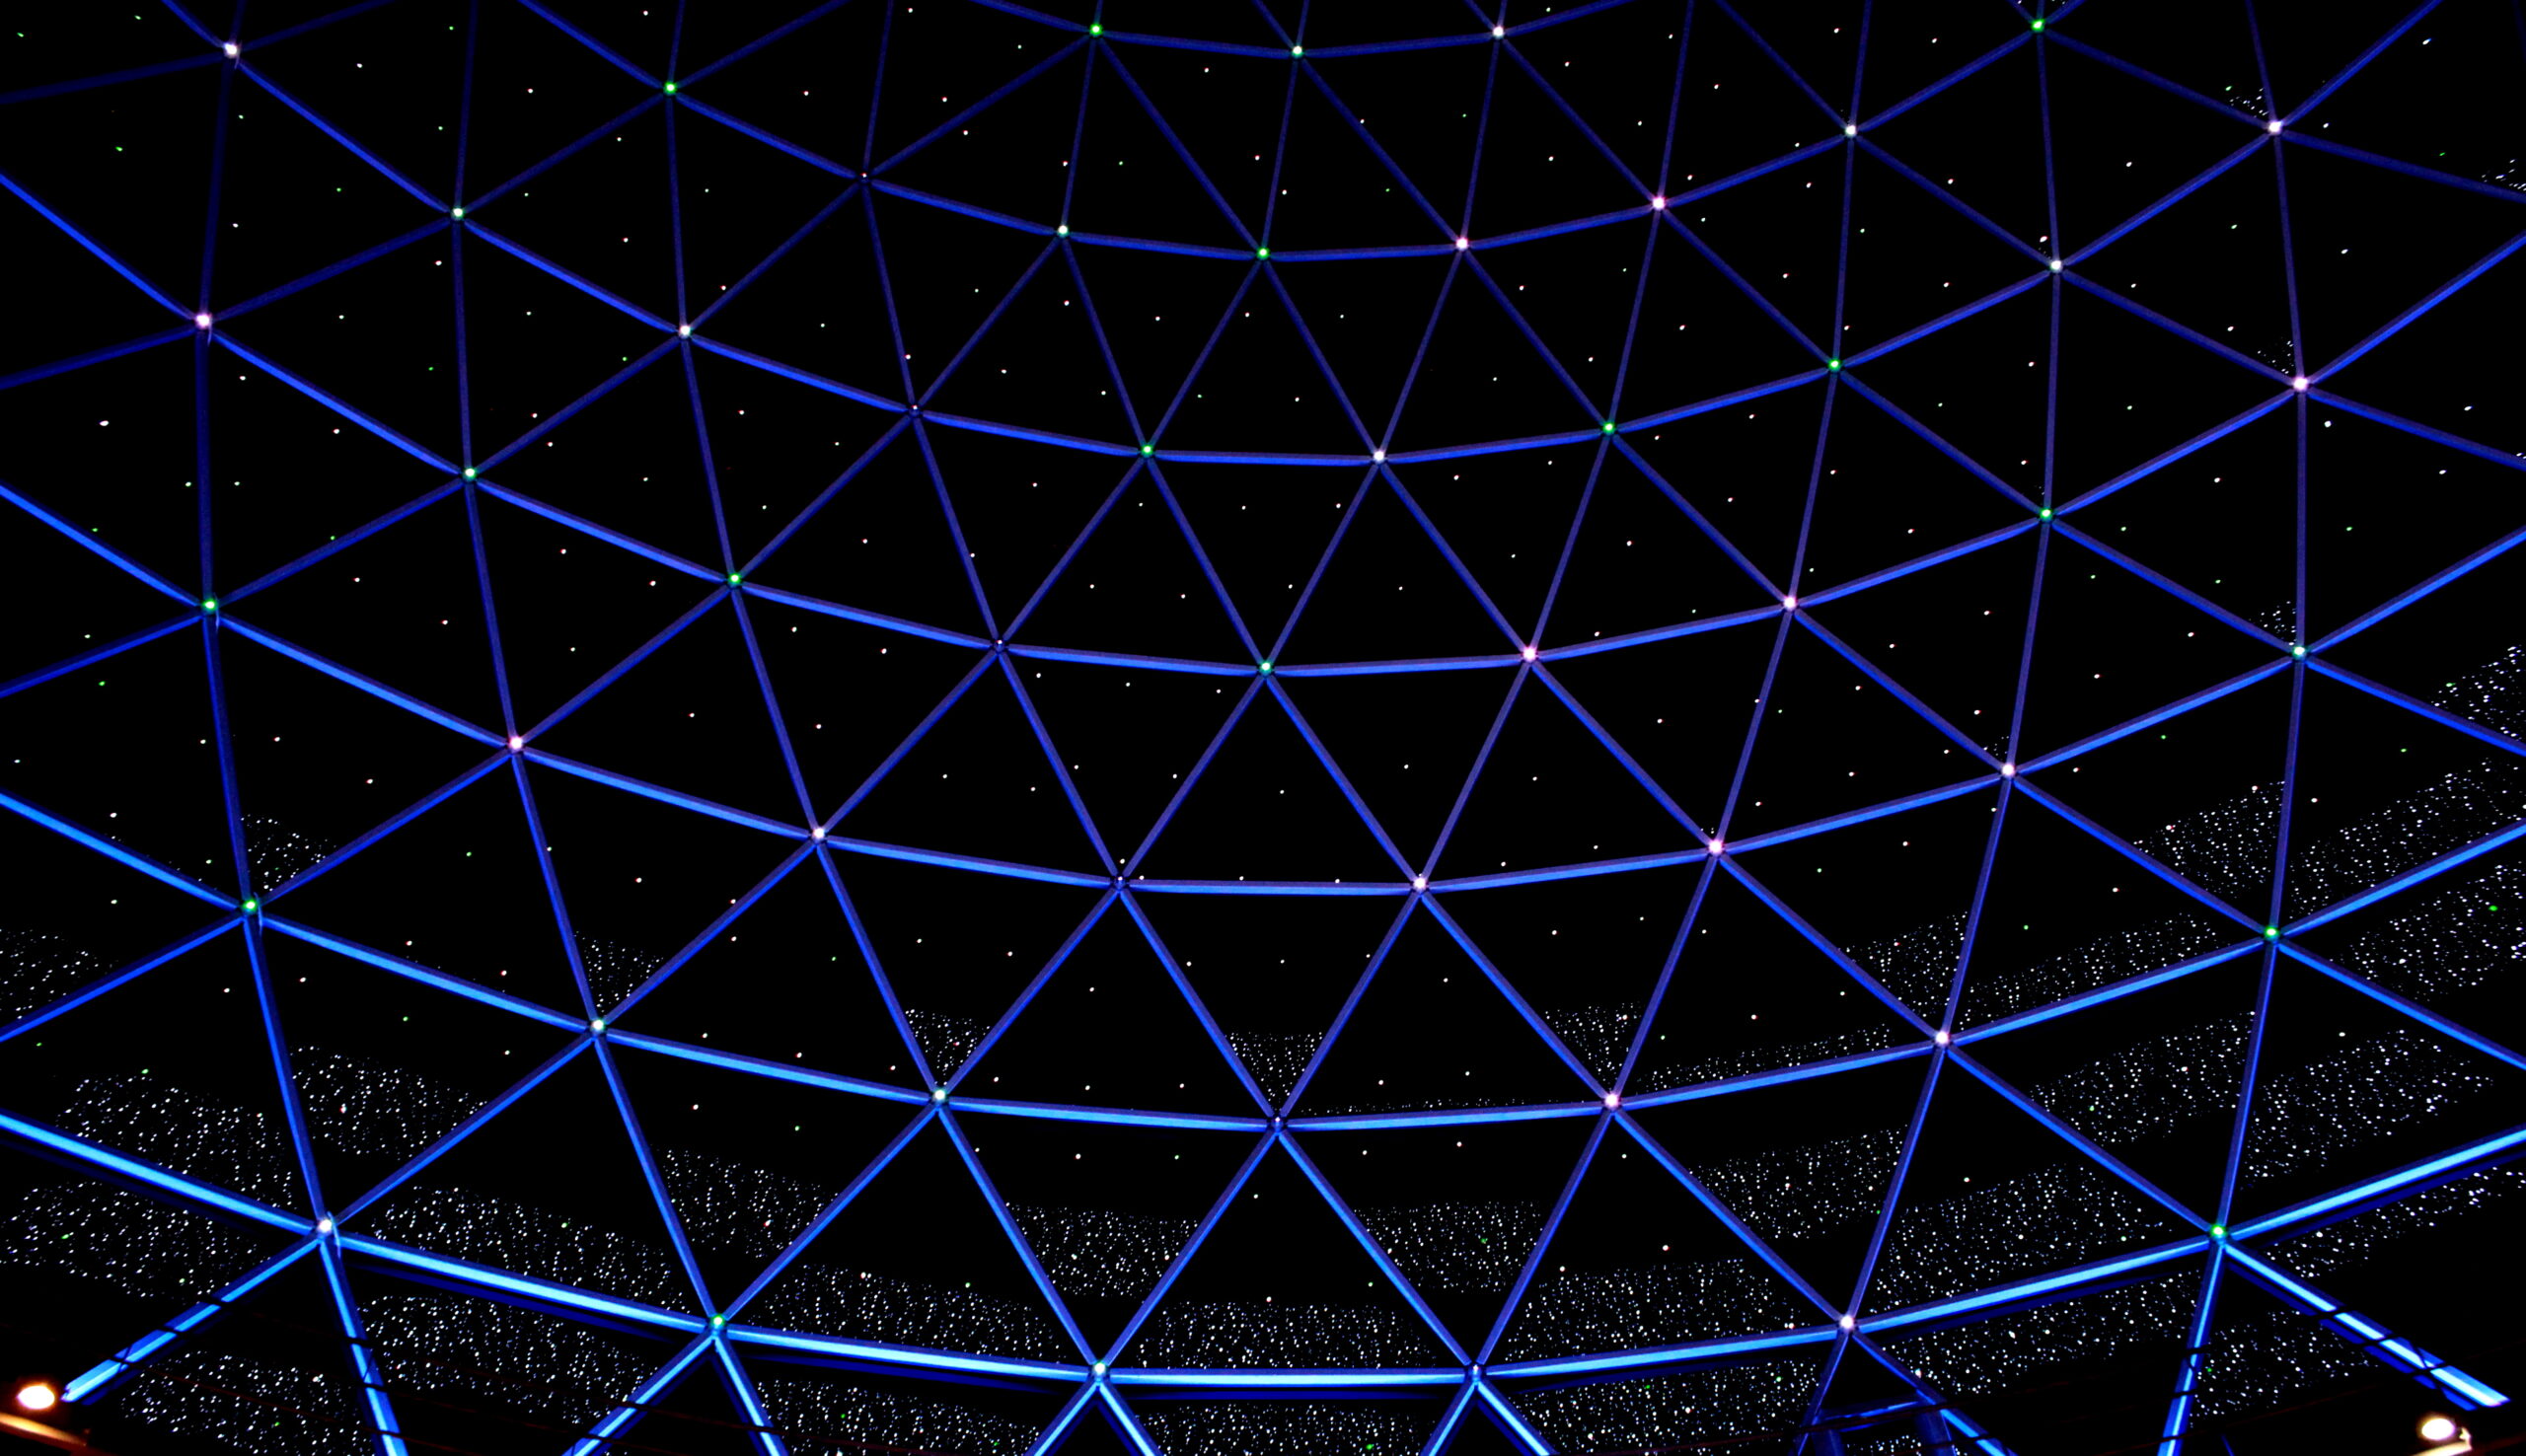 Abstract photo of circles from the inside of a dome